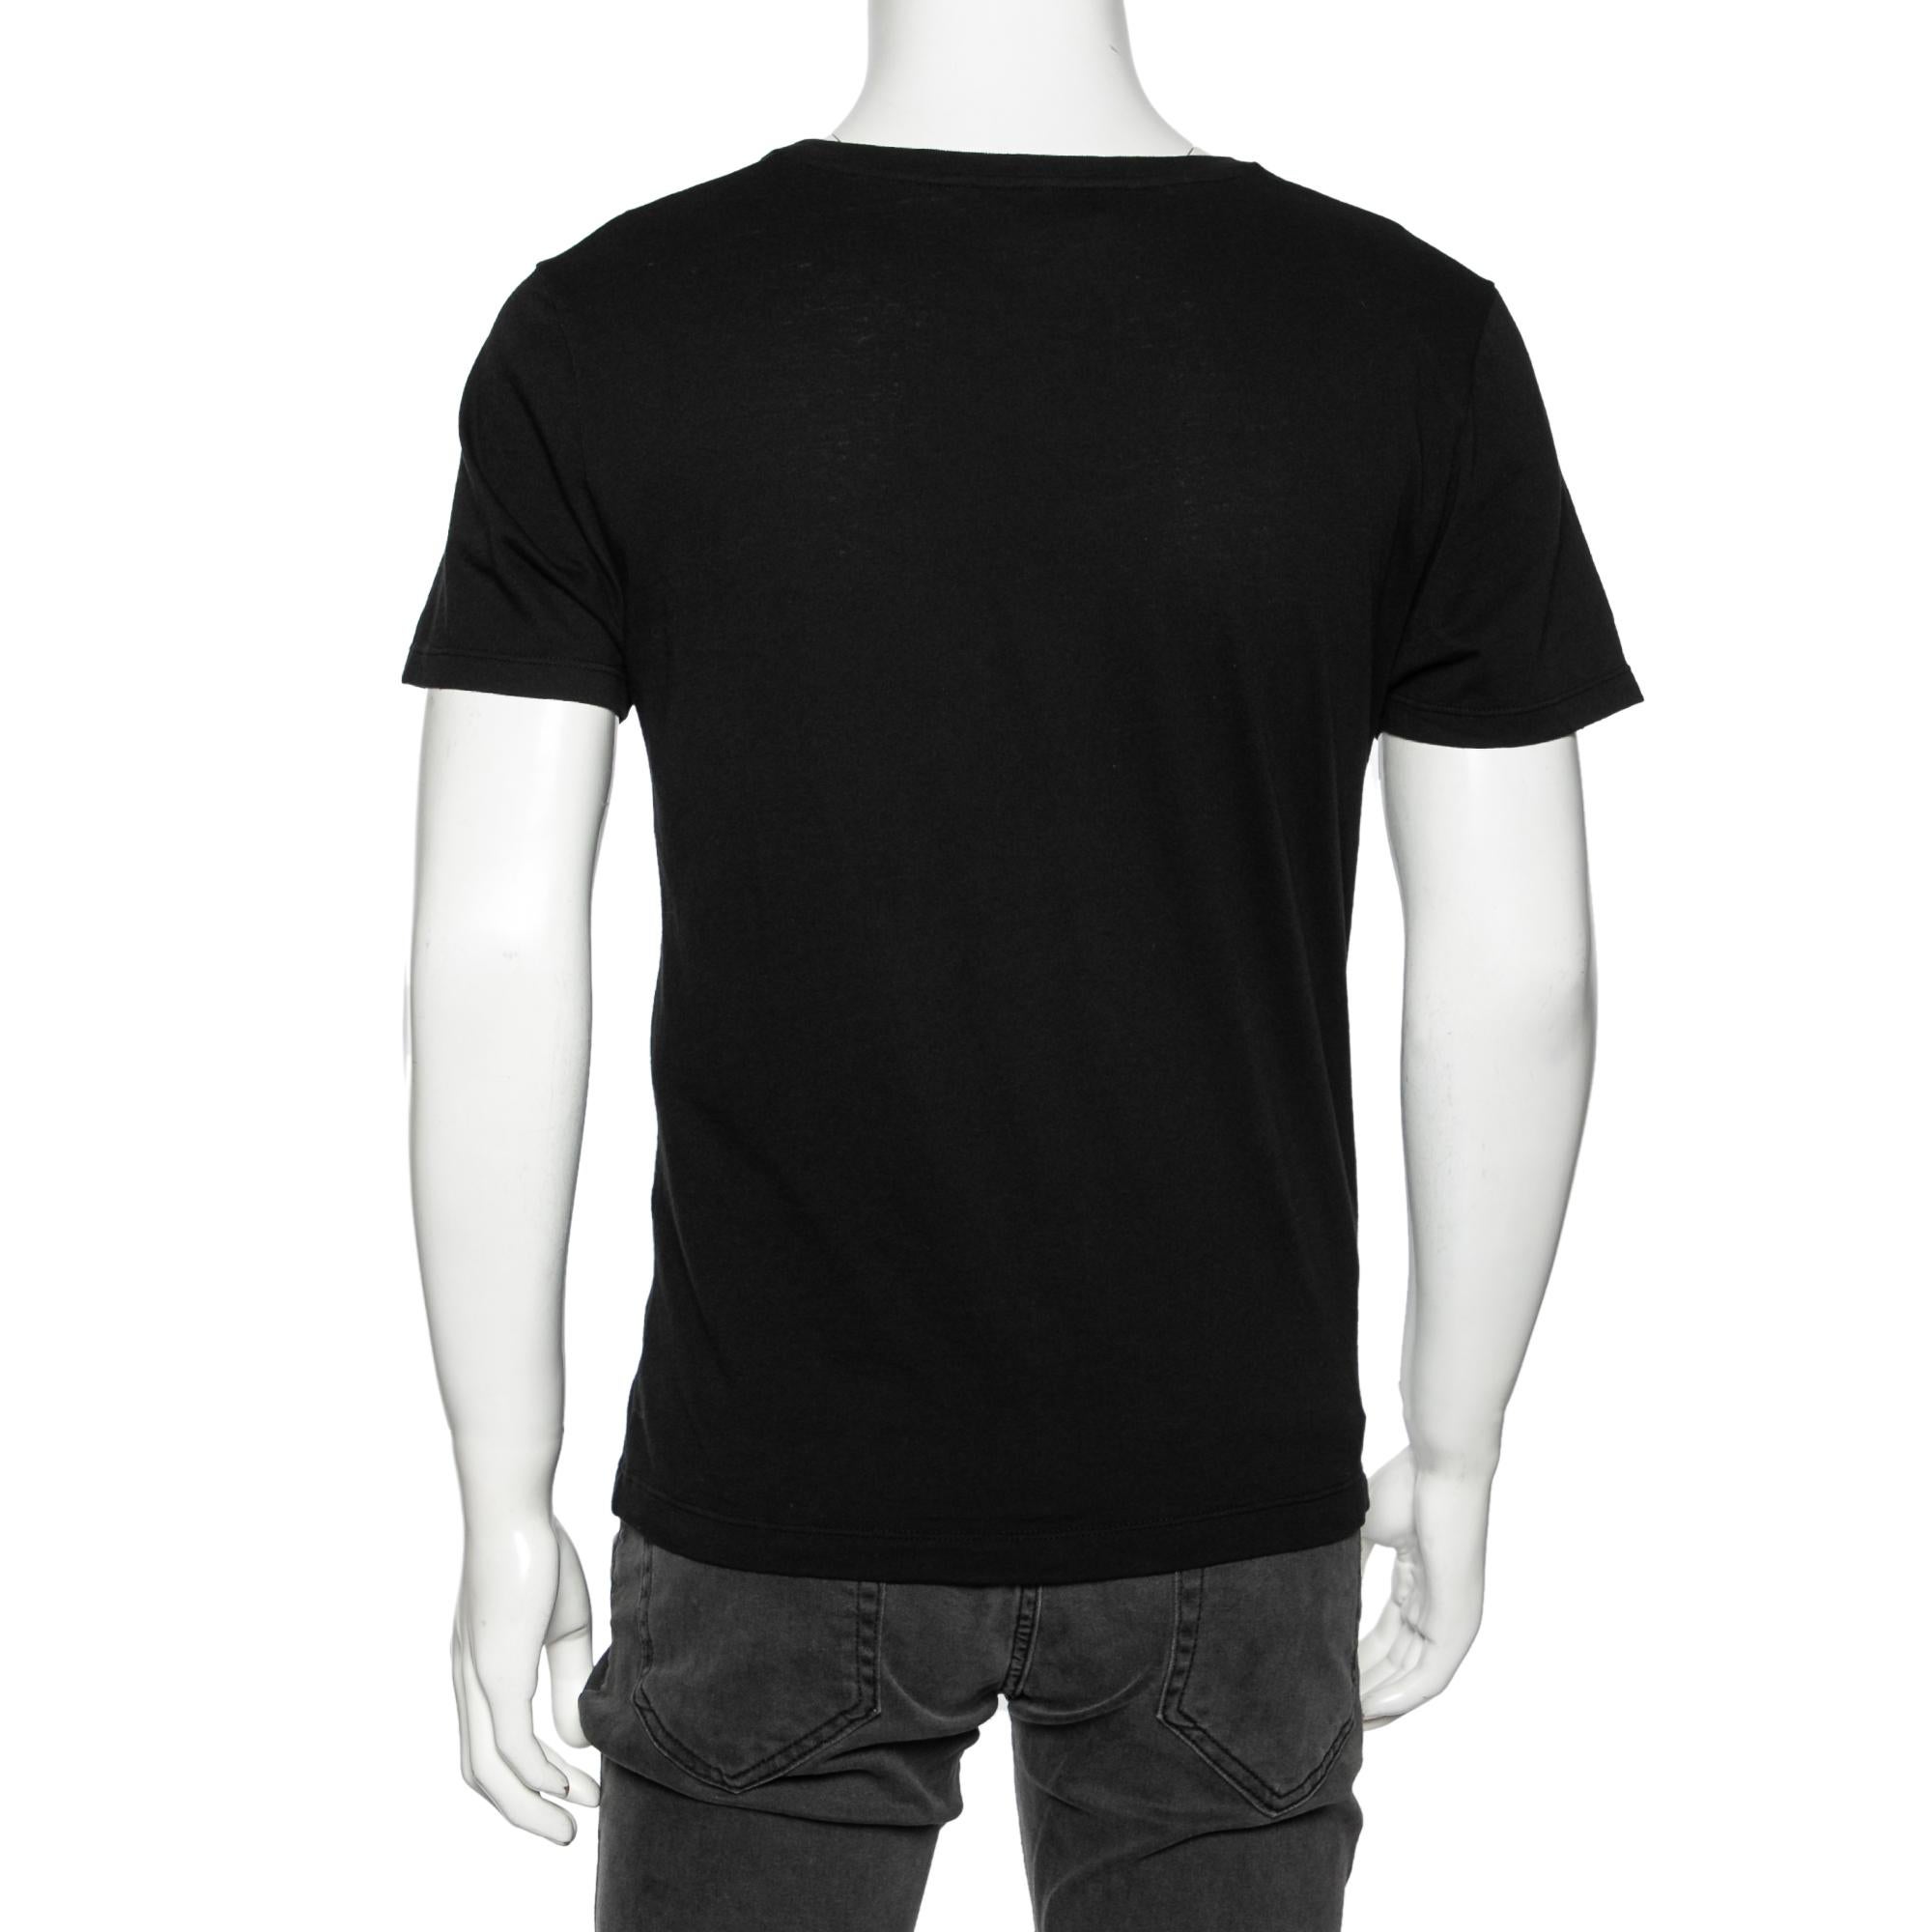 This T-shirt from Gucci keeps you at ease and maximizes your comfort. Made of cotton fabric and enhanced with the brand logo printed on the front, the piece is an example of fine craftsmanship and luxe casual style. Pair this black Gucci T-shirt